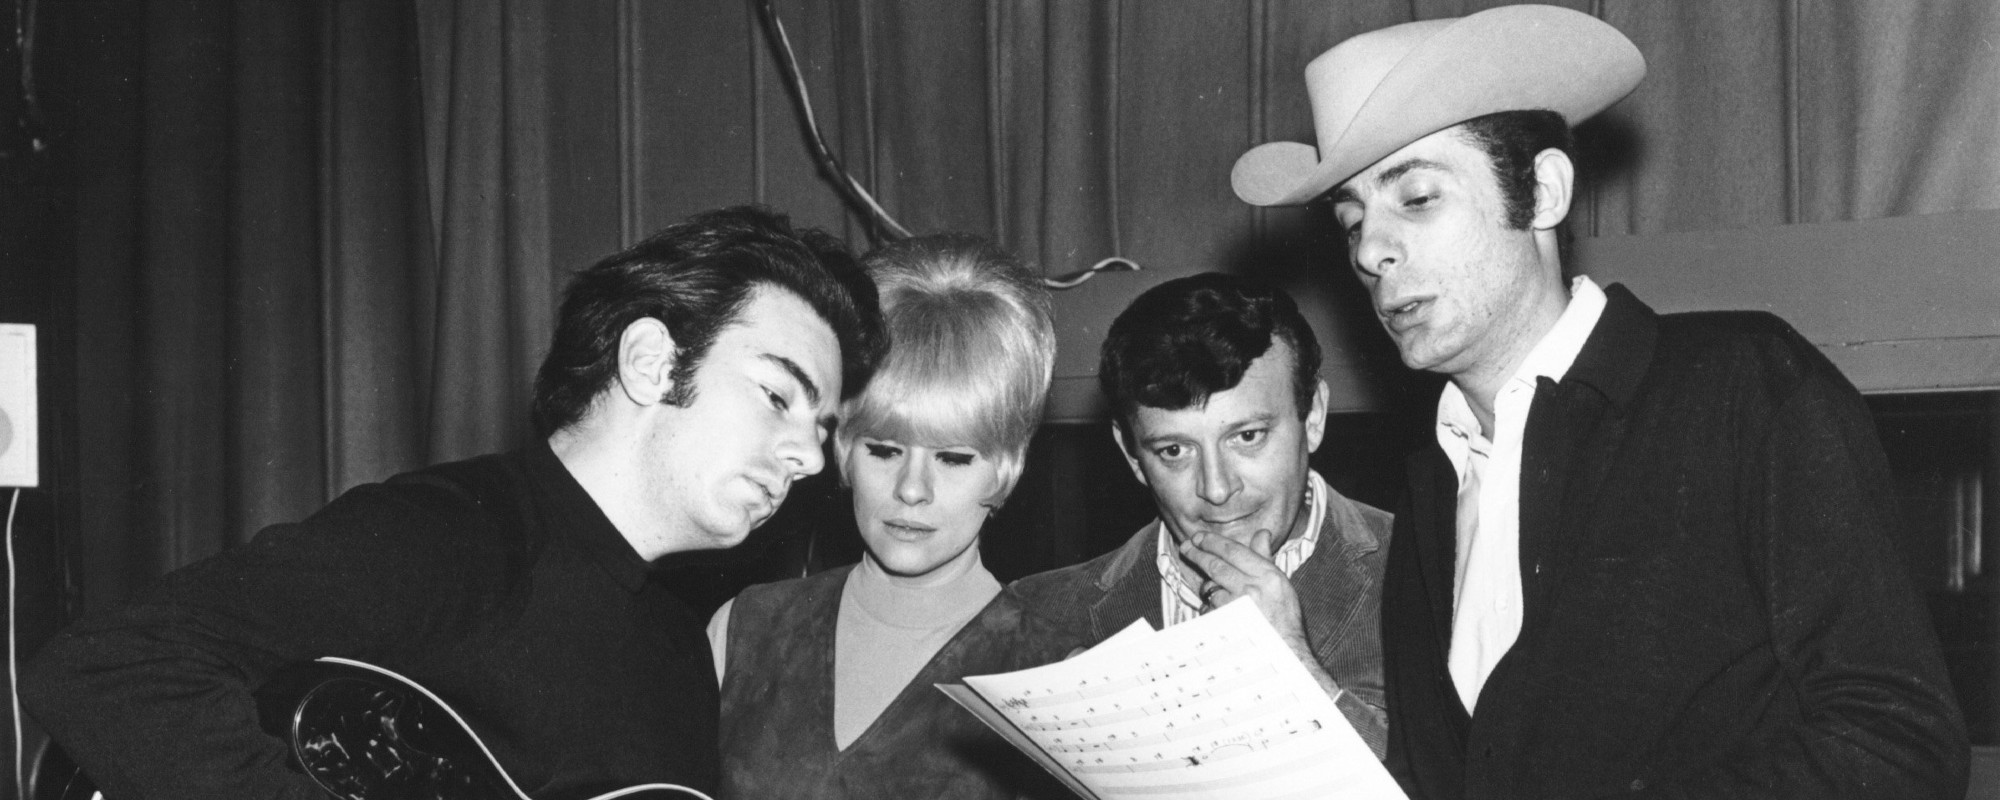 5 Fascinating Facts About Multifaceted Music Executive Bert Berns